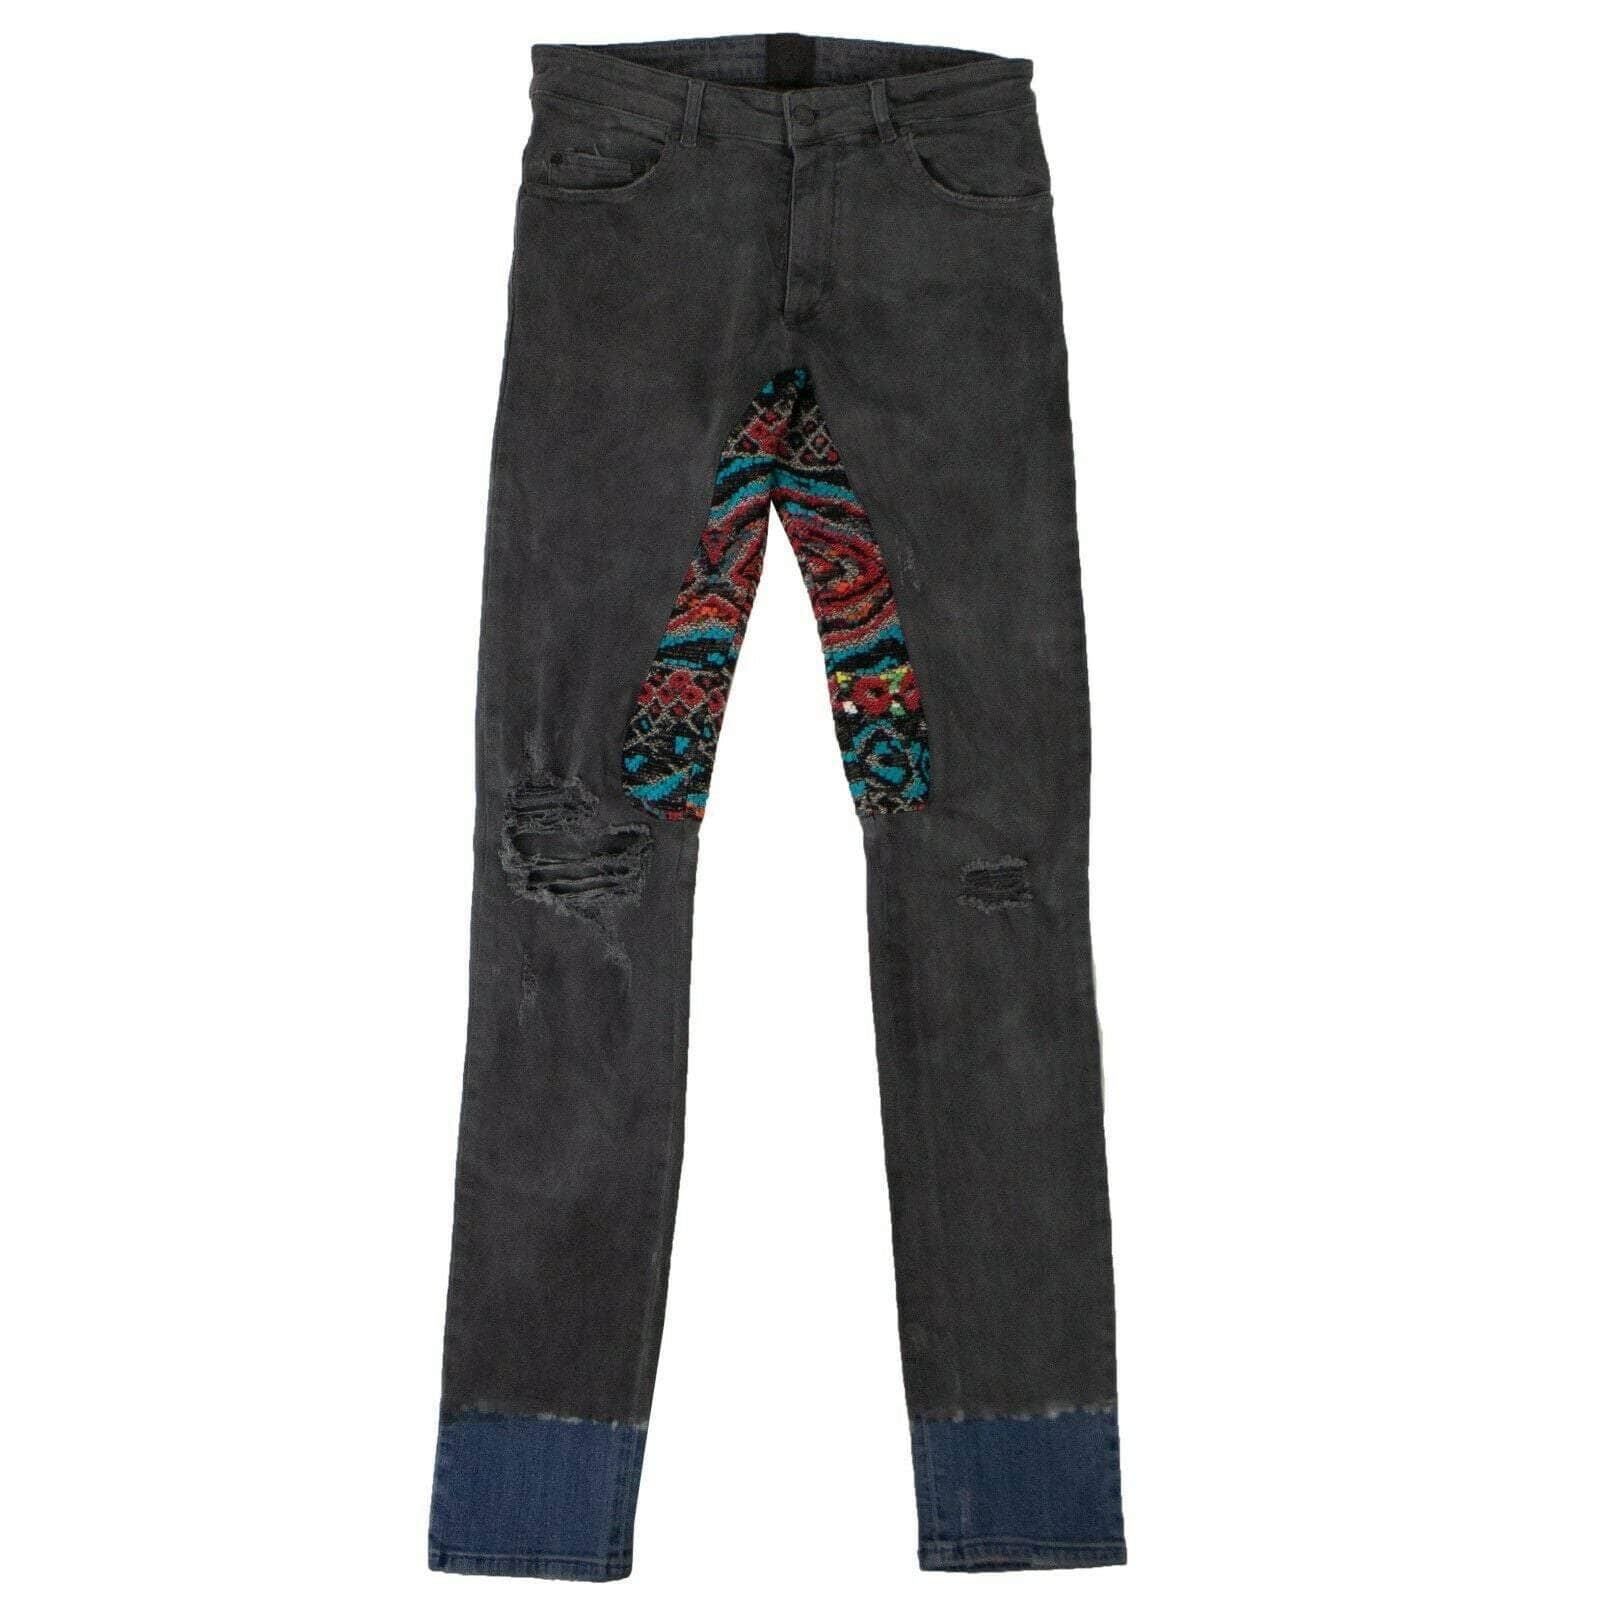 Alchemist 250-500, 500-750, alchemist, chicmi, couponcollection, gender-mens, main-clothing, mens-jeans, mens-shoes, mens-skinny-jeans, size-30, size-31, size-32, size-33, size-34 Dino Jacquard And Dip Dyed Jeans - Gray